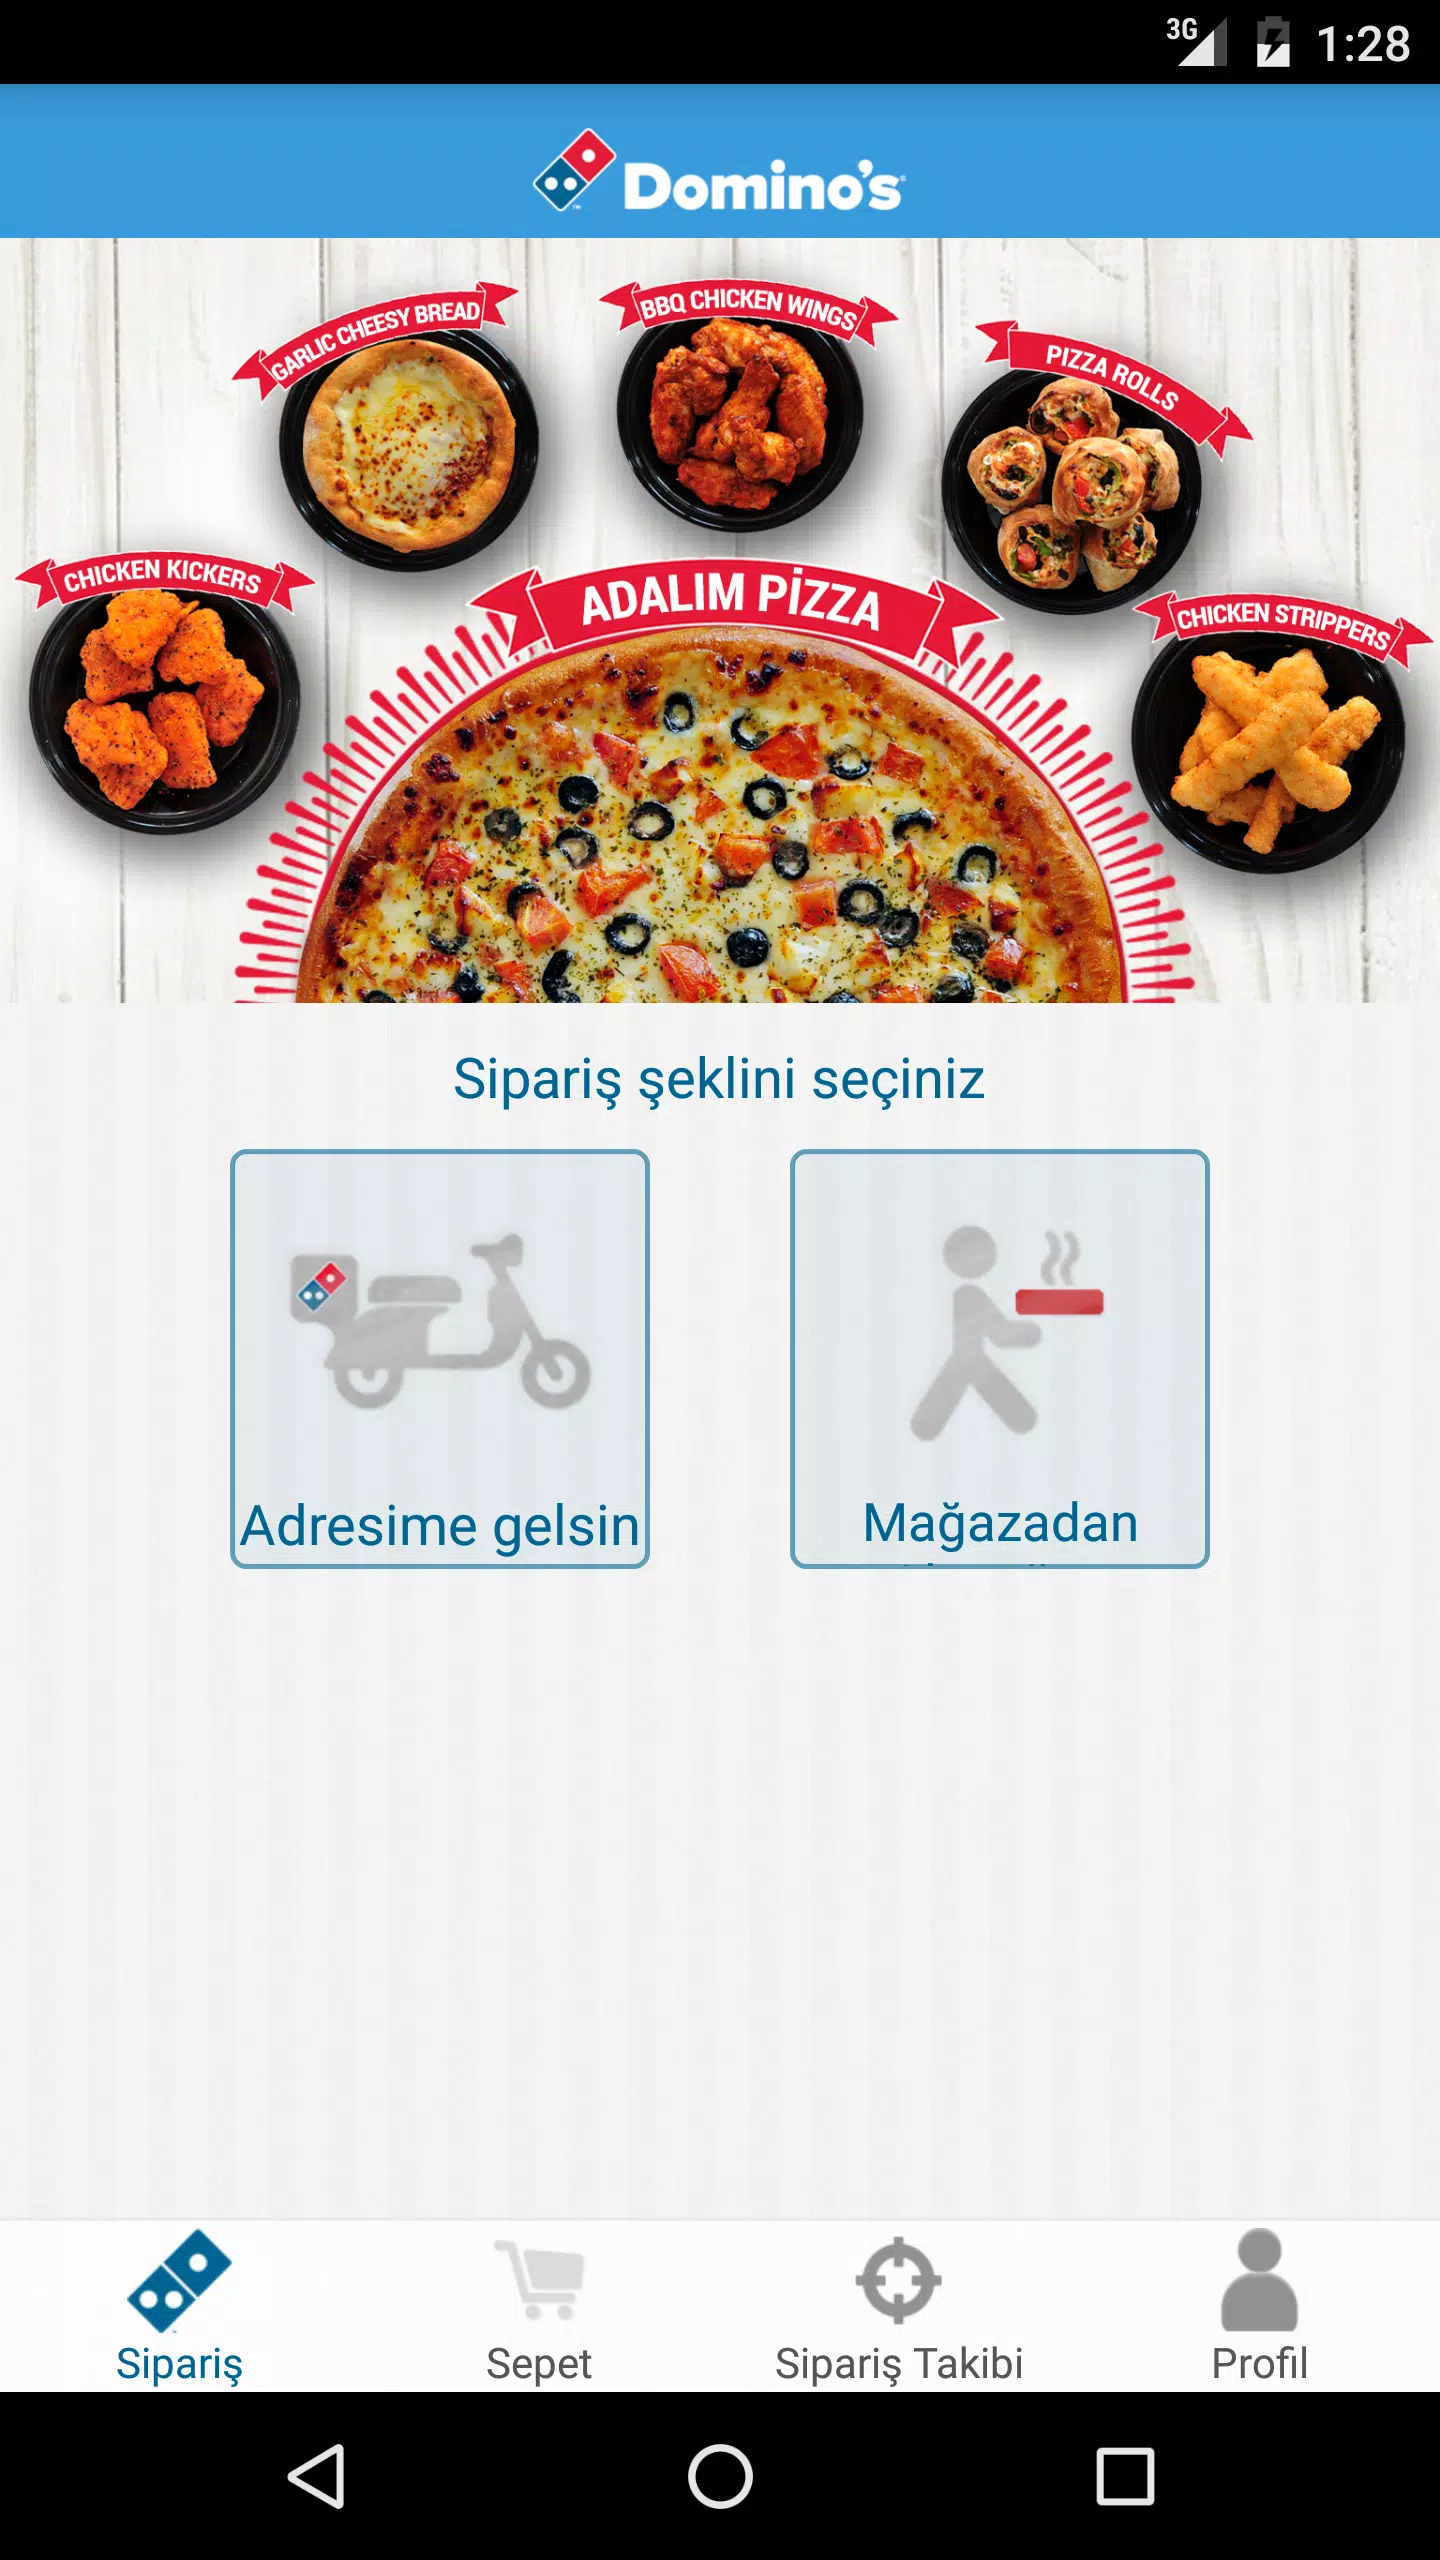 Domino's Pizza USA for Android - Download the APK from Uptodown